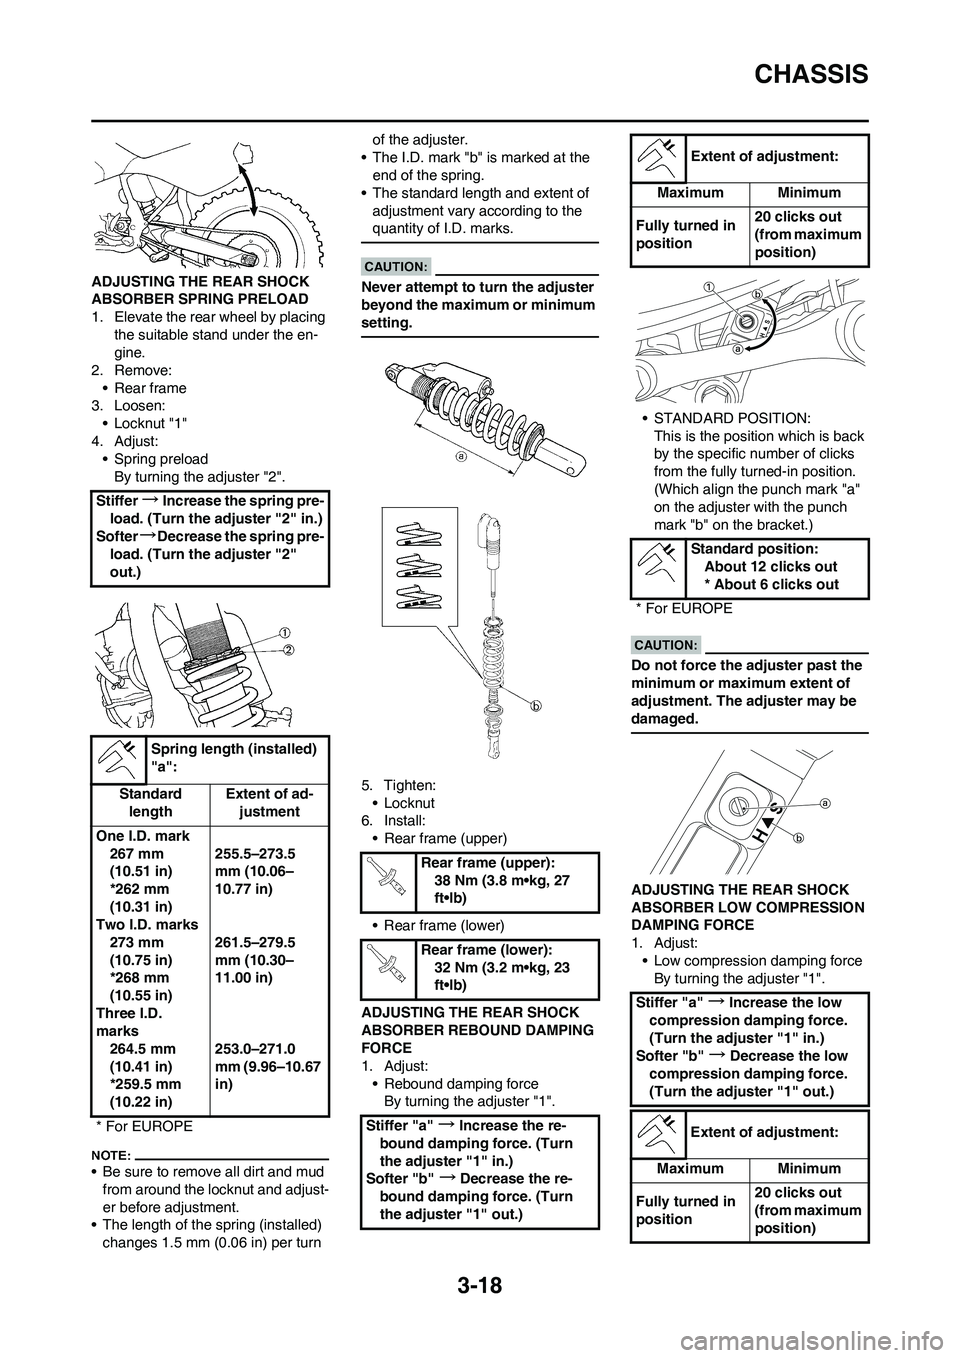 YAMAHA YZ450F 2008  Owners Manual 3-18
CHASSIS
ADJUSTING THE REAR SHOCK 
ABSORBER SPRING PRELOAD
1. Elevate the rear wheel by placing 
the suitable stand under the en-
gine.
2. Remove:
• Rear frame
3. Loosen:
• Locknut "1"
4. Adju